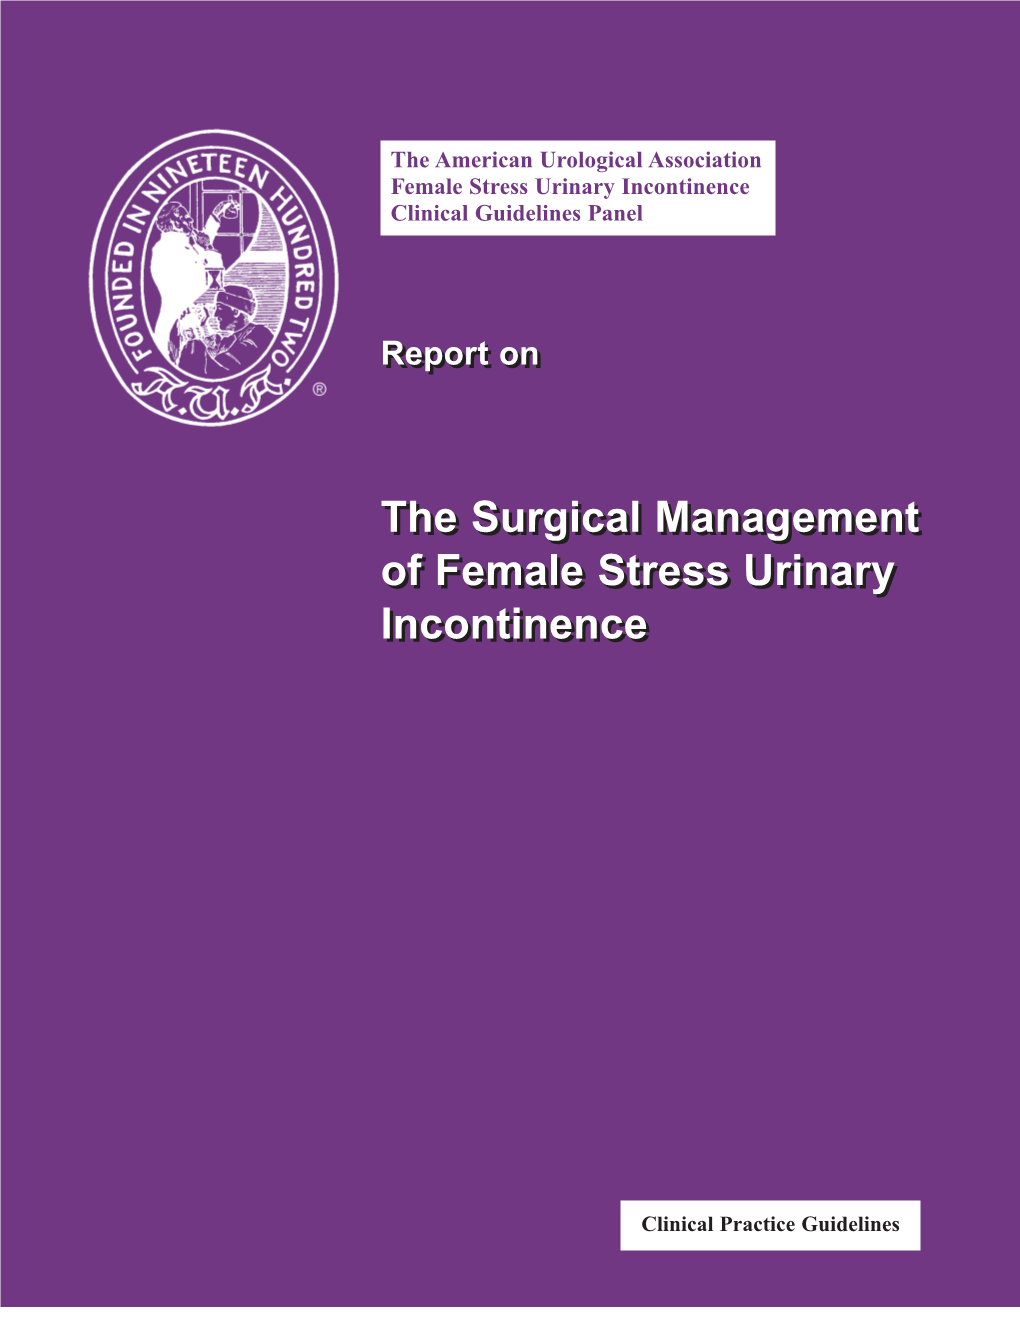 The Surgical Management of Female Stress Urinary Incontinence Was Extensively Reviewed by Over 50 Physicians Throughout the Country in November 1996